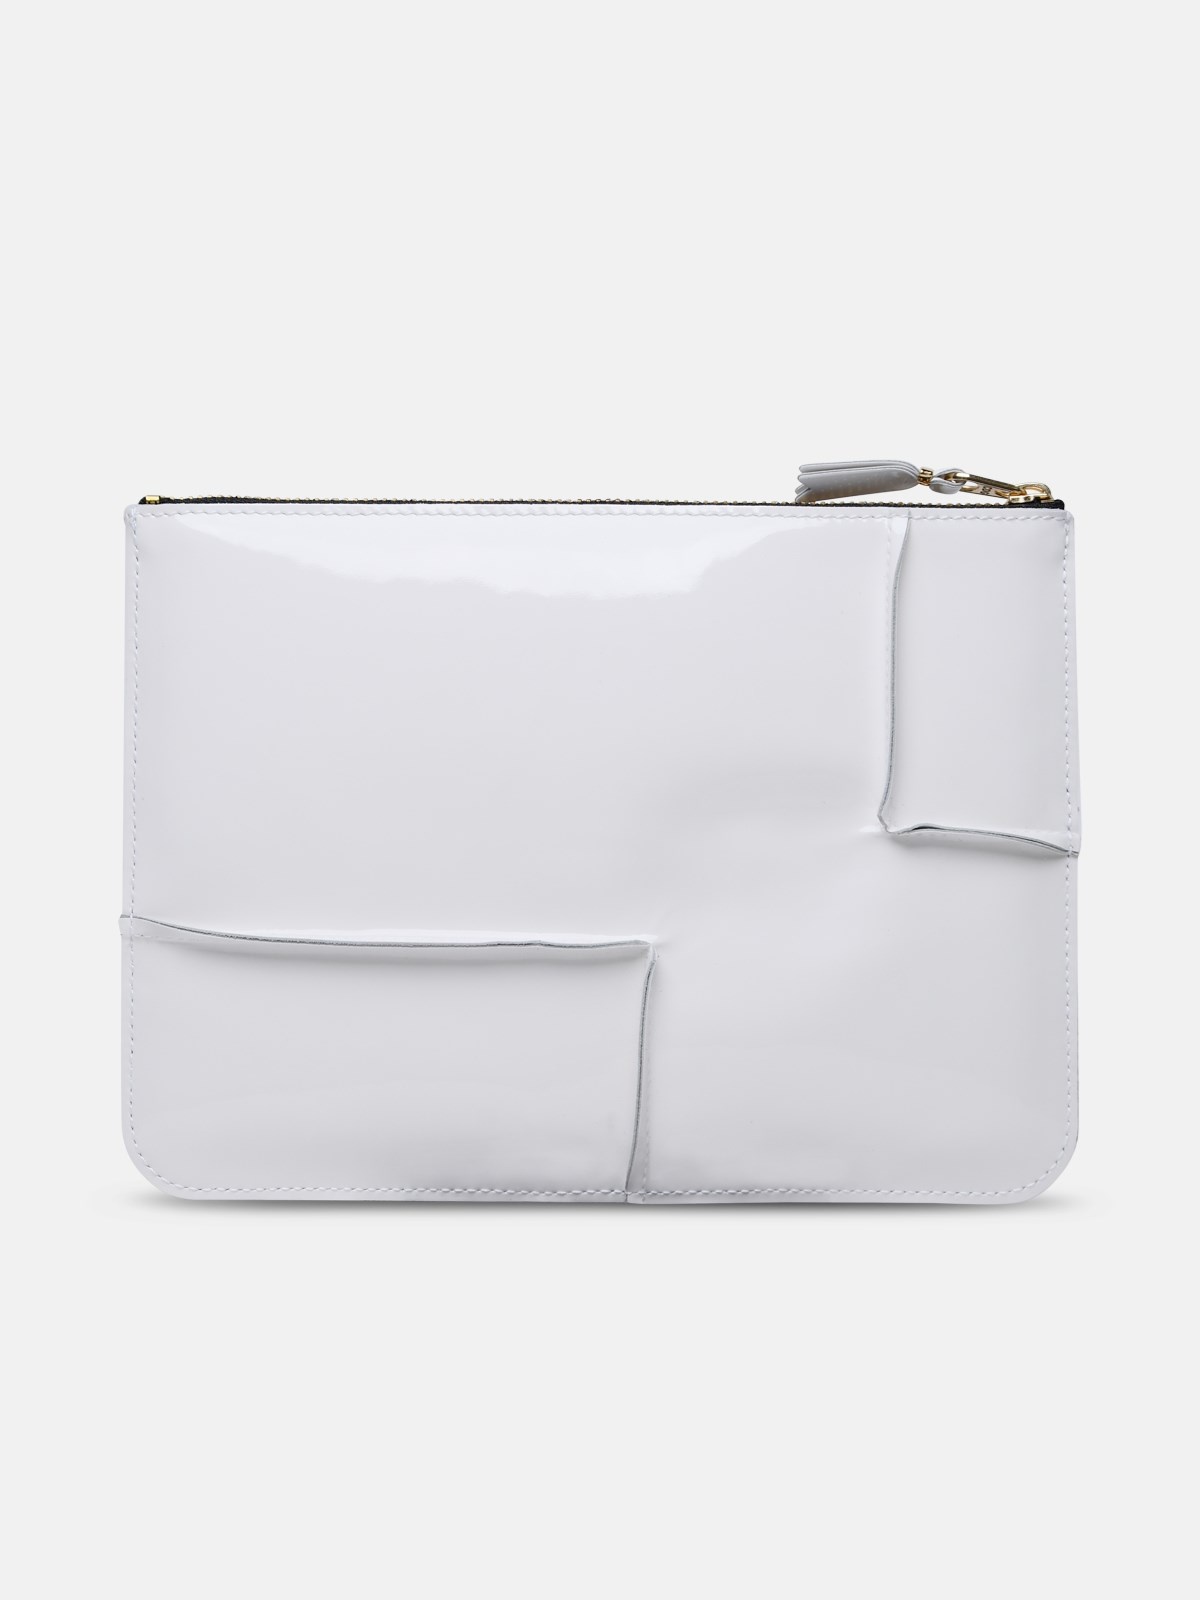 'MEDLEY' WHITE LEATHER PACKET - 3